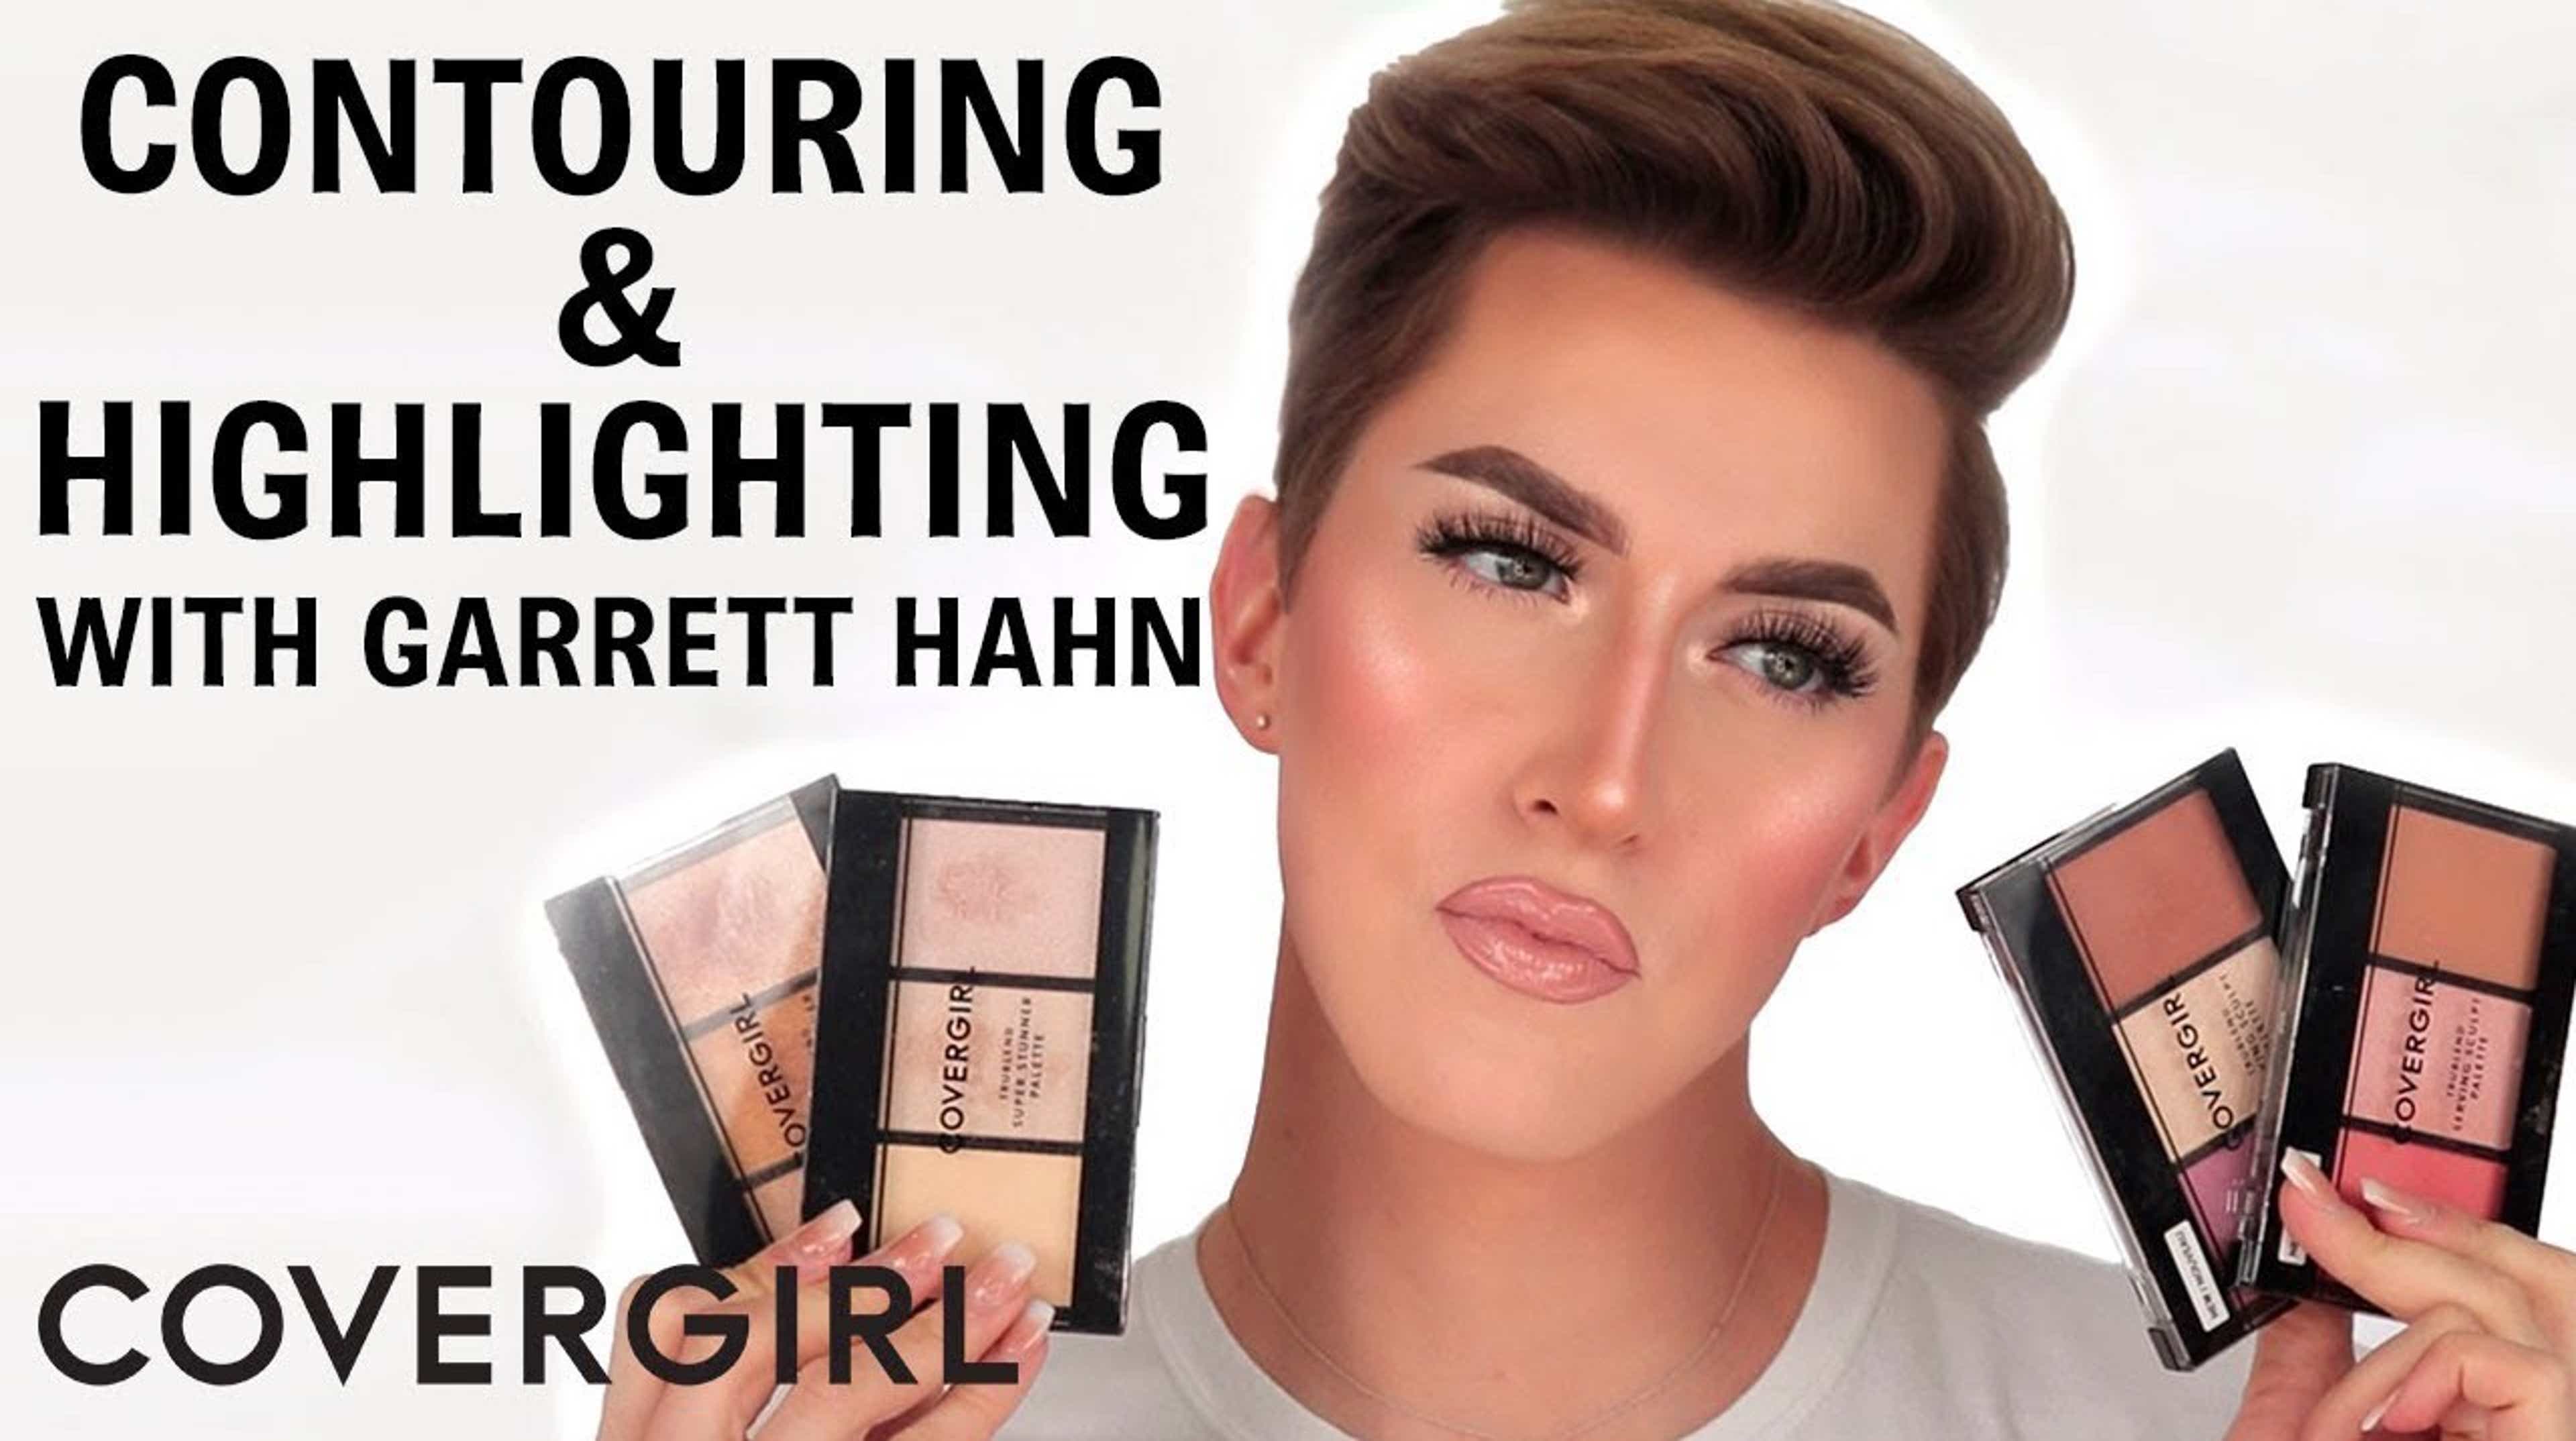 How to Contour and Highlight with Garrett Hahn